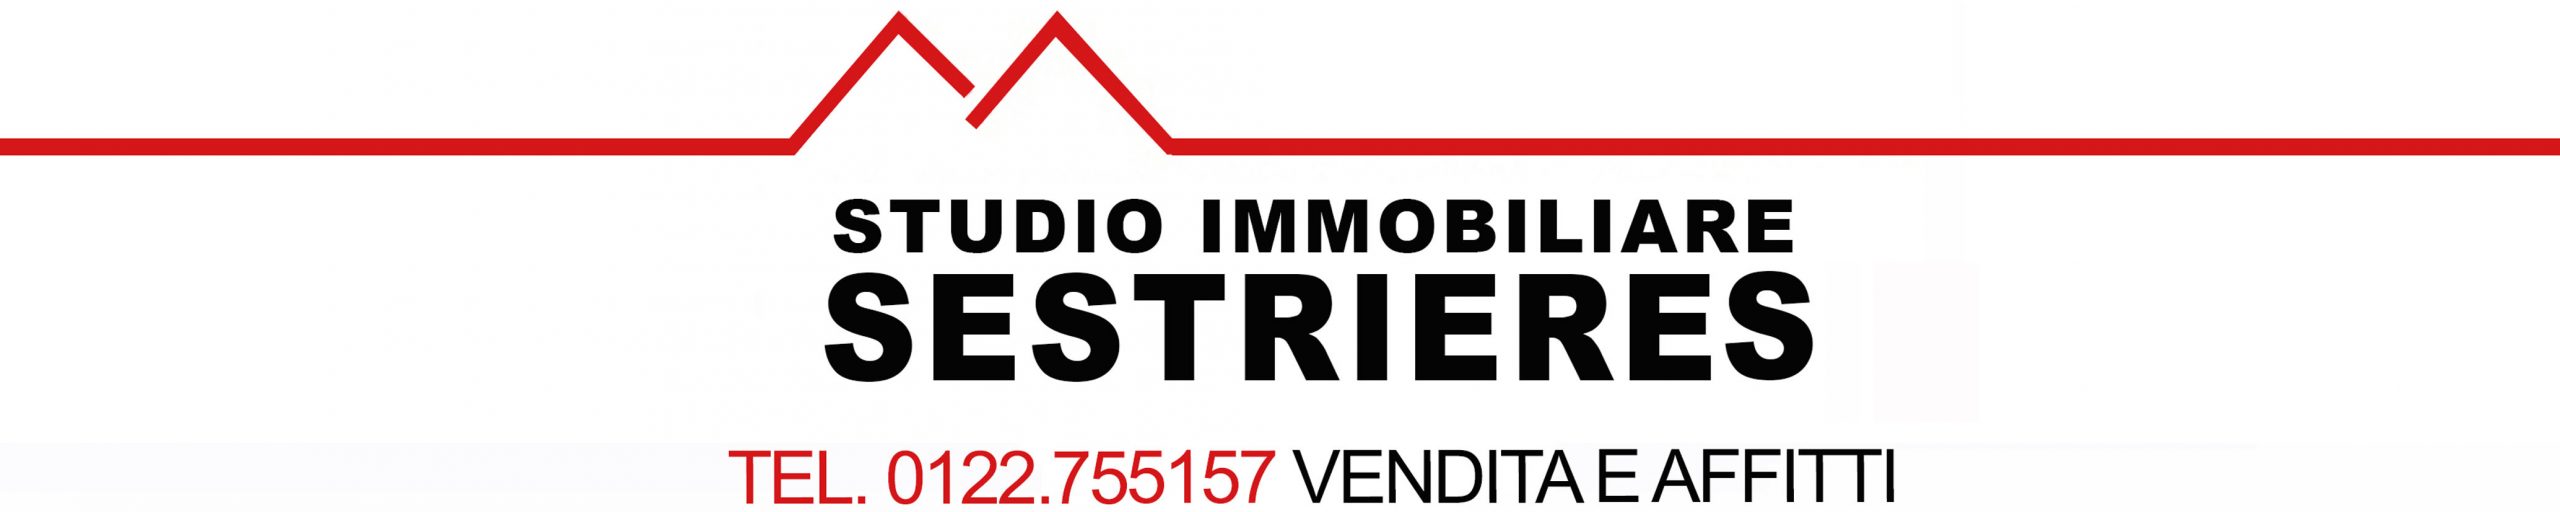 immobiliare sestrieres 